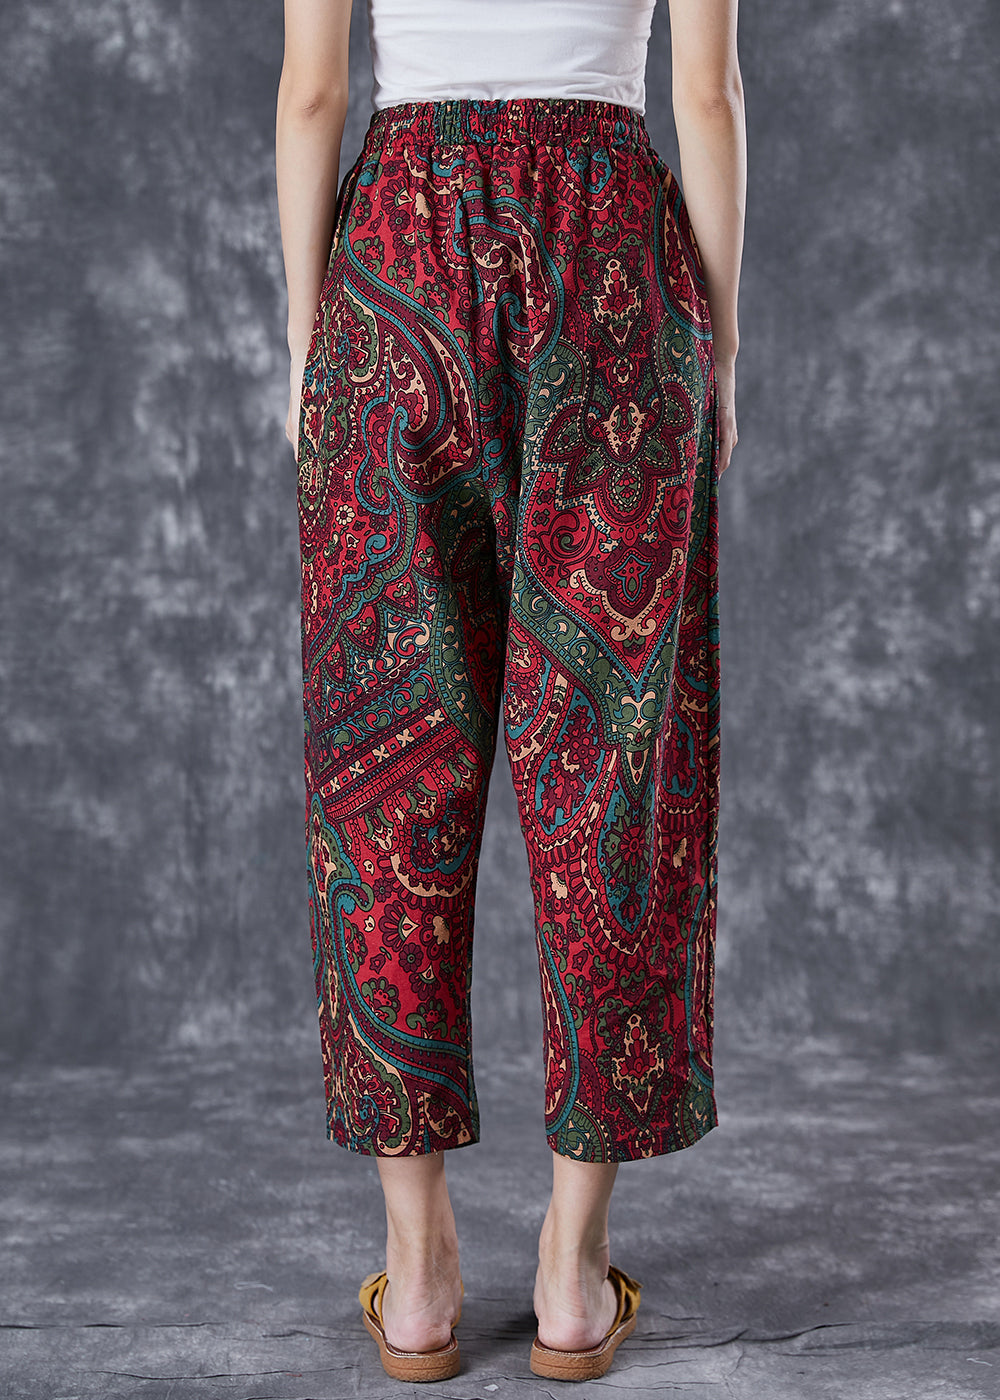 Casual Red Oversized Pockets Print Linen Pants Trousers Summer LY7042 - fabuloryshop